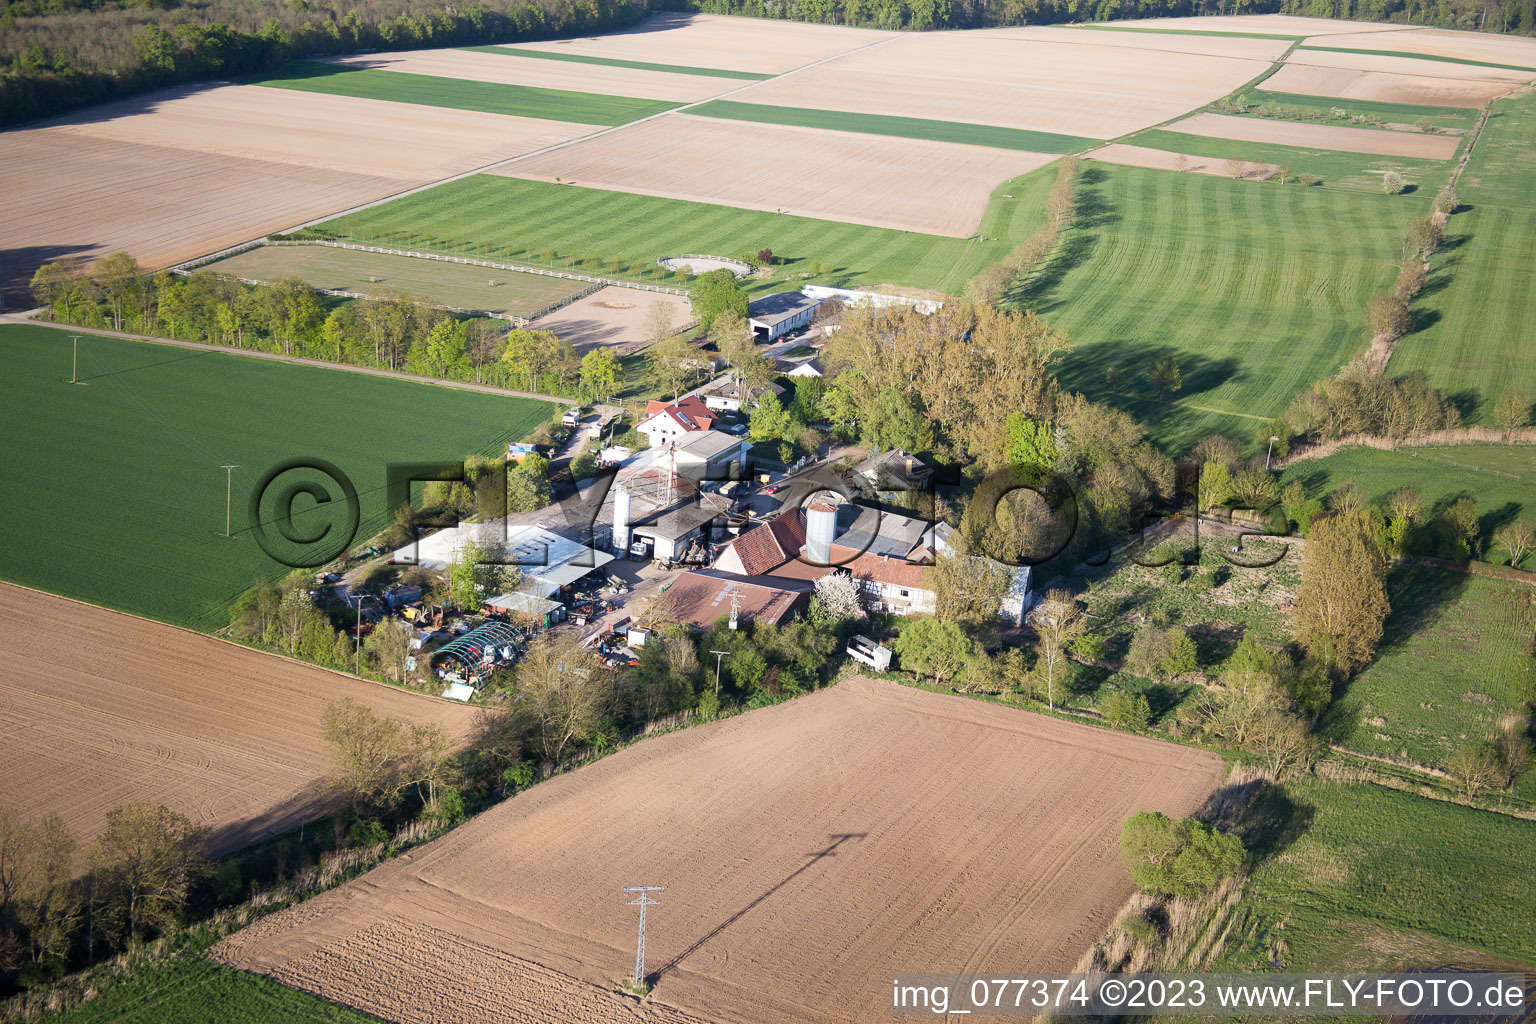 Aerial photograpy of Winden in the state Rhineland-Palatinate, Germany